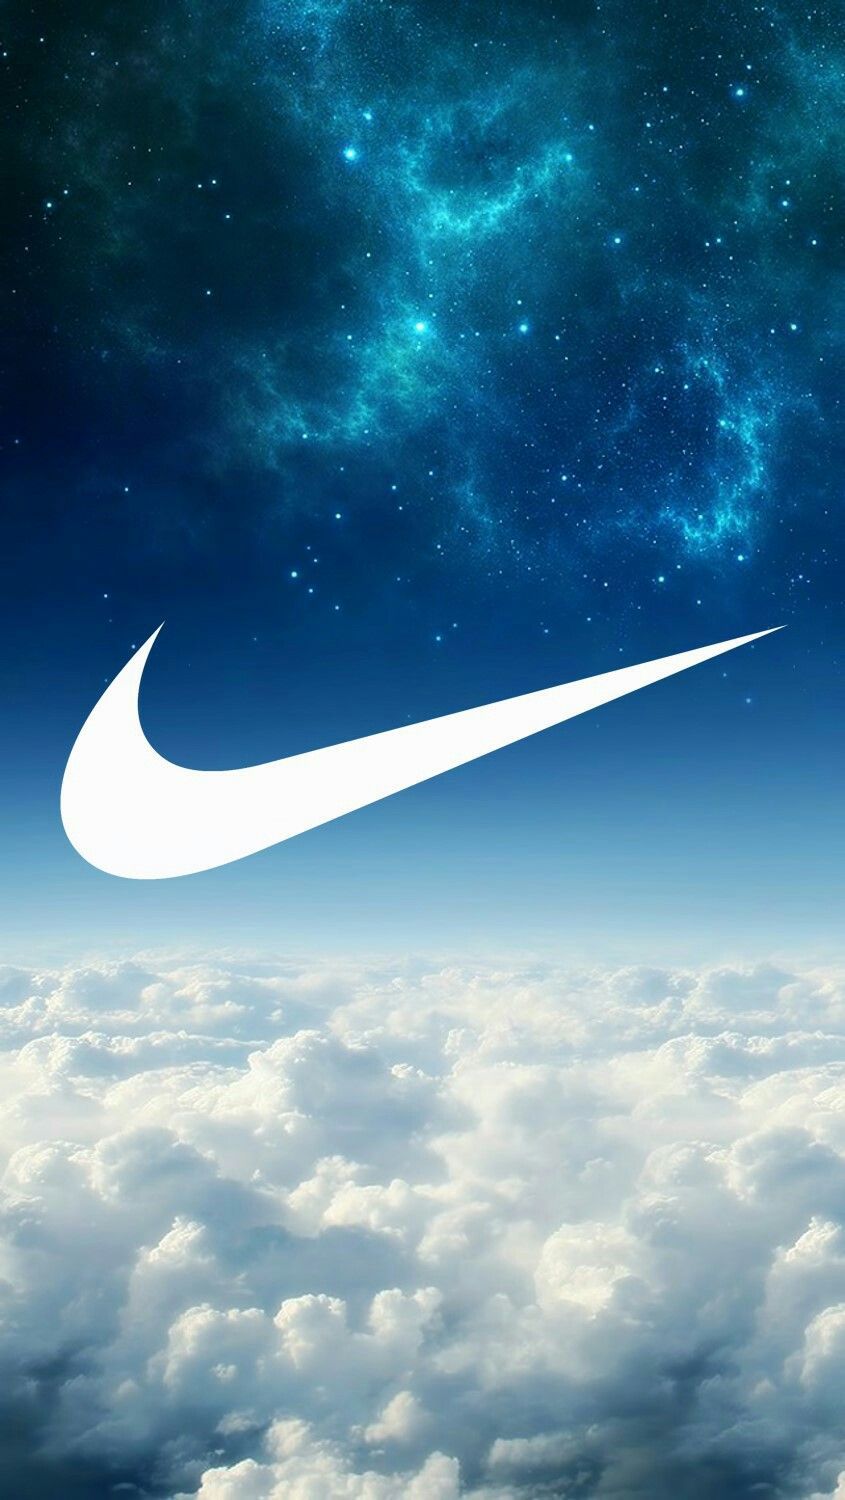 hypebeast #wallpaper #allezlesbleus #iphone #android #background #오웬 샌디. Nike wallpaper, Cool nike wallpaper, Phone wallpaper image